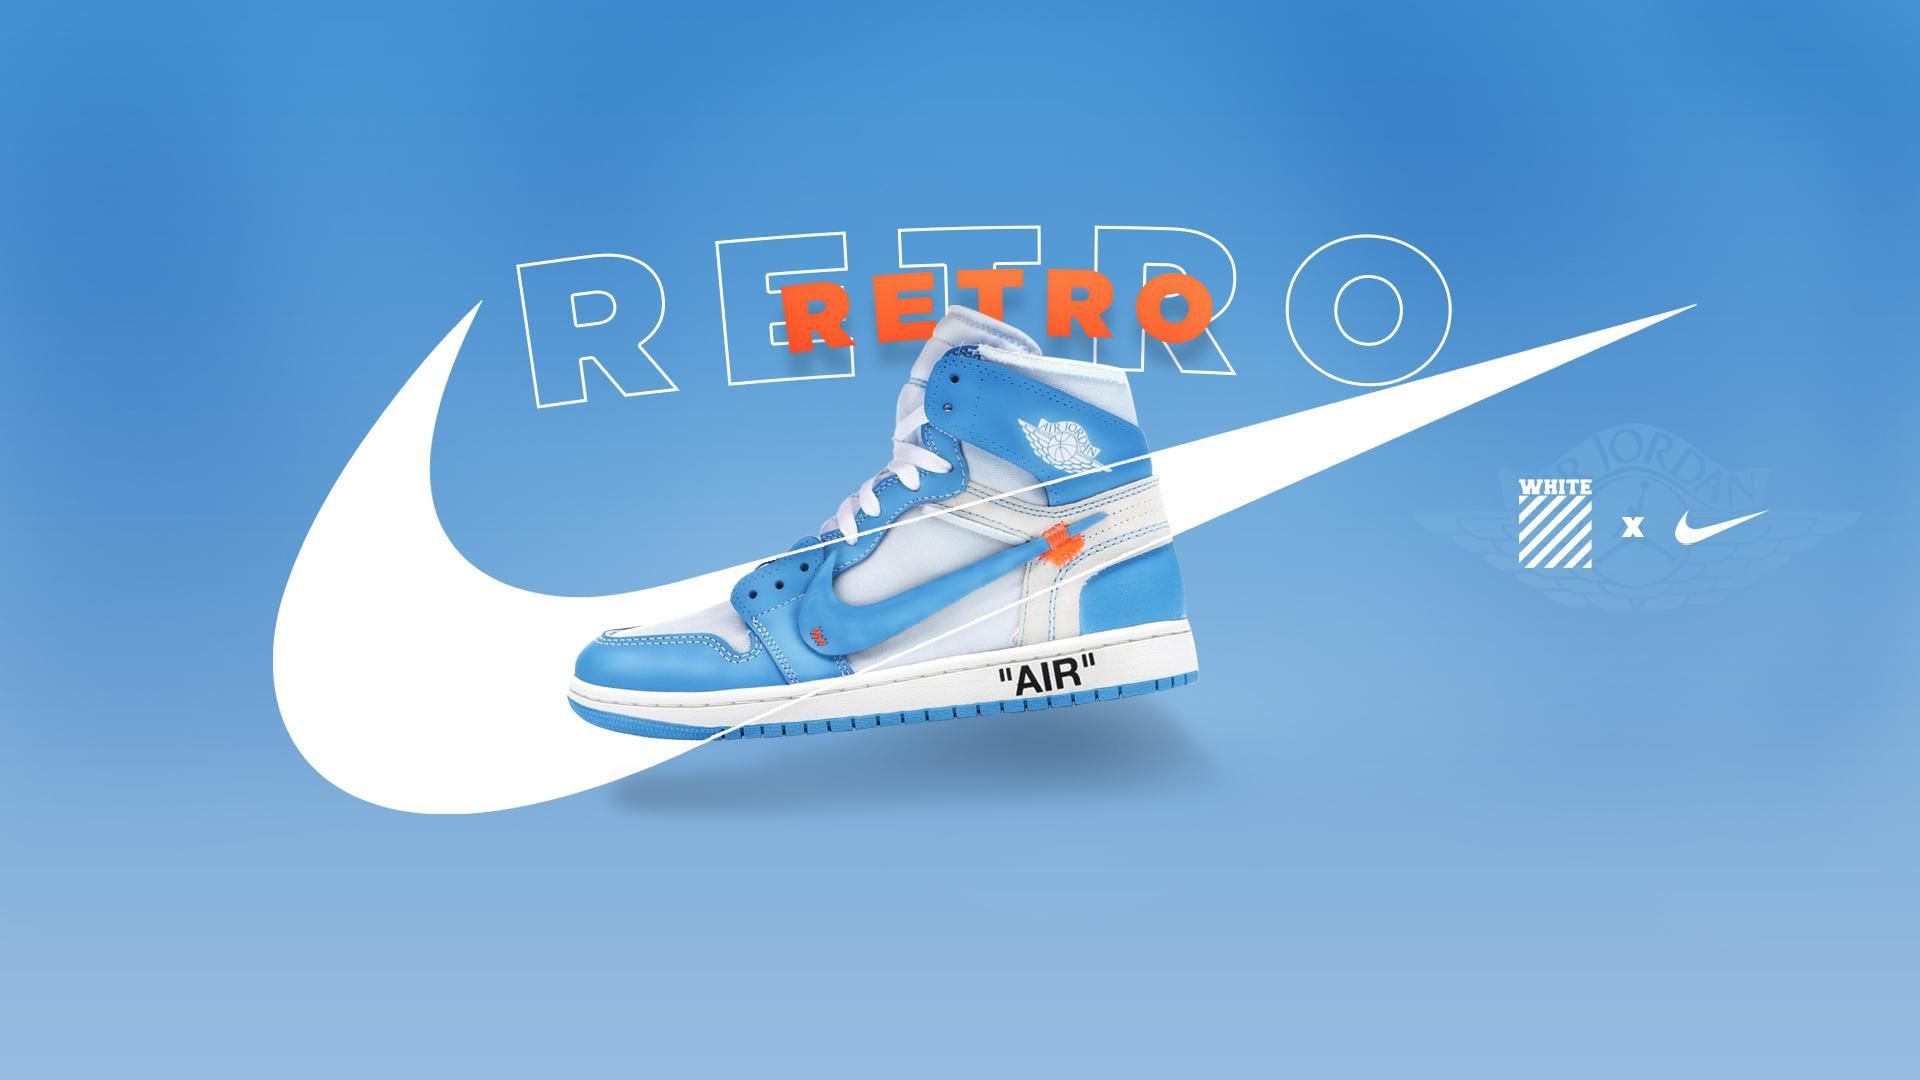 Air Jordan 1 Retro High OG 'UNC' Advertisement I made that can also be used a. Jordan logo wallpaper, Jordan shoes wallpaper, Supreme iphone wallpaper